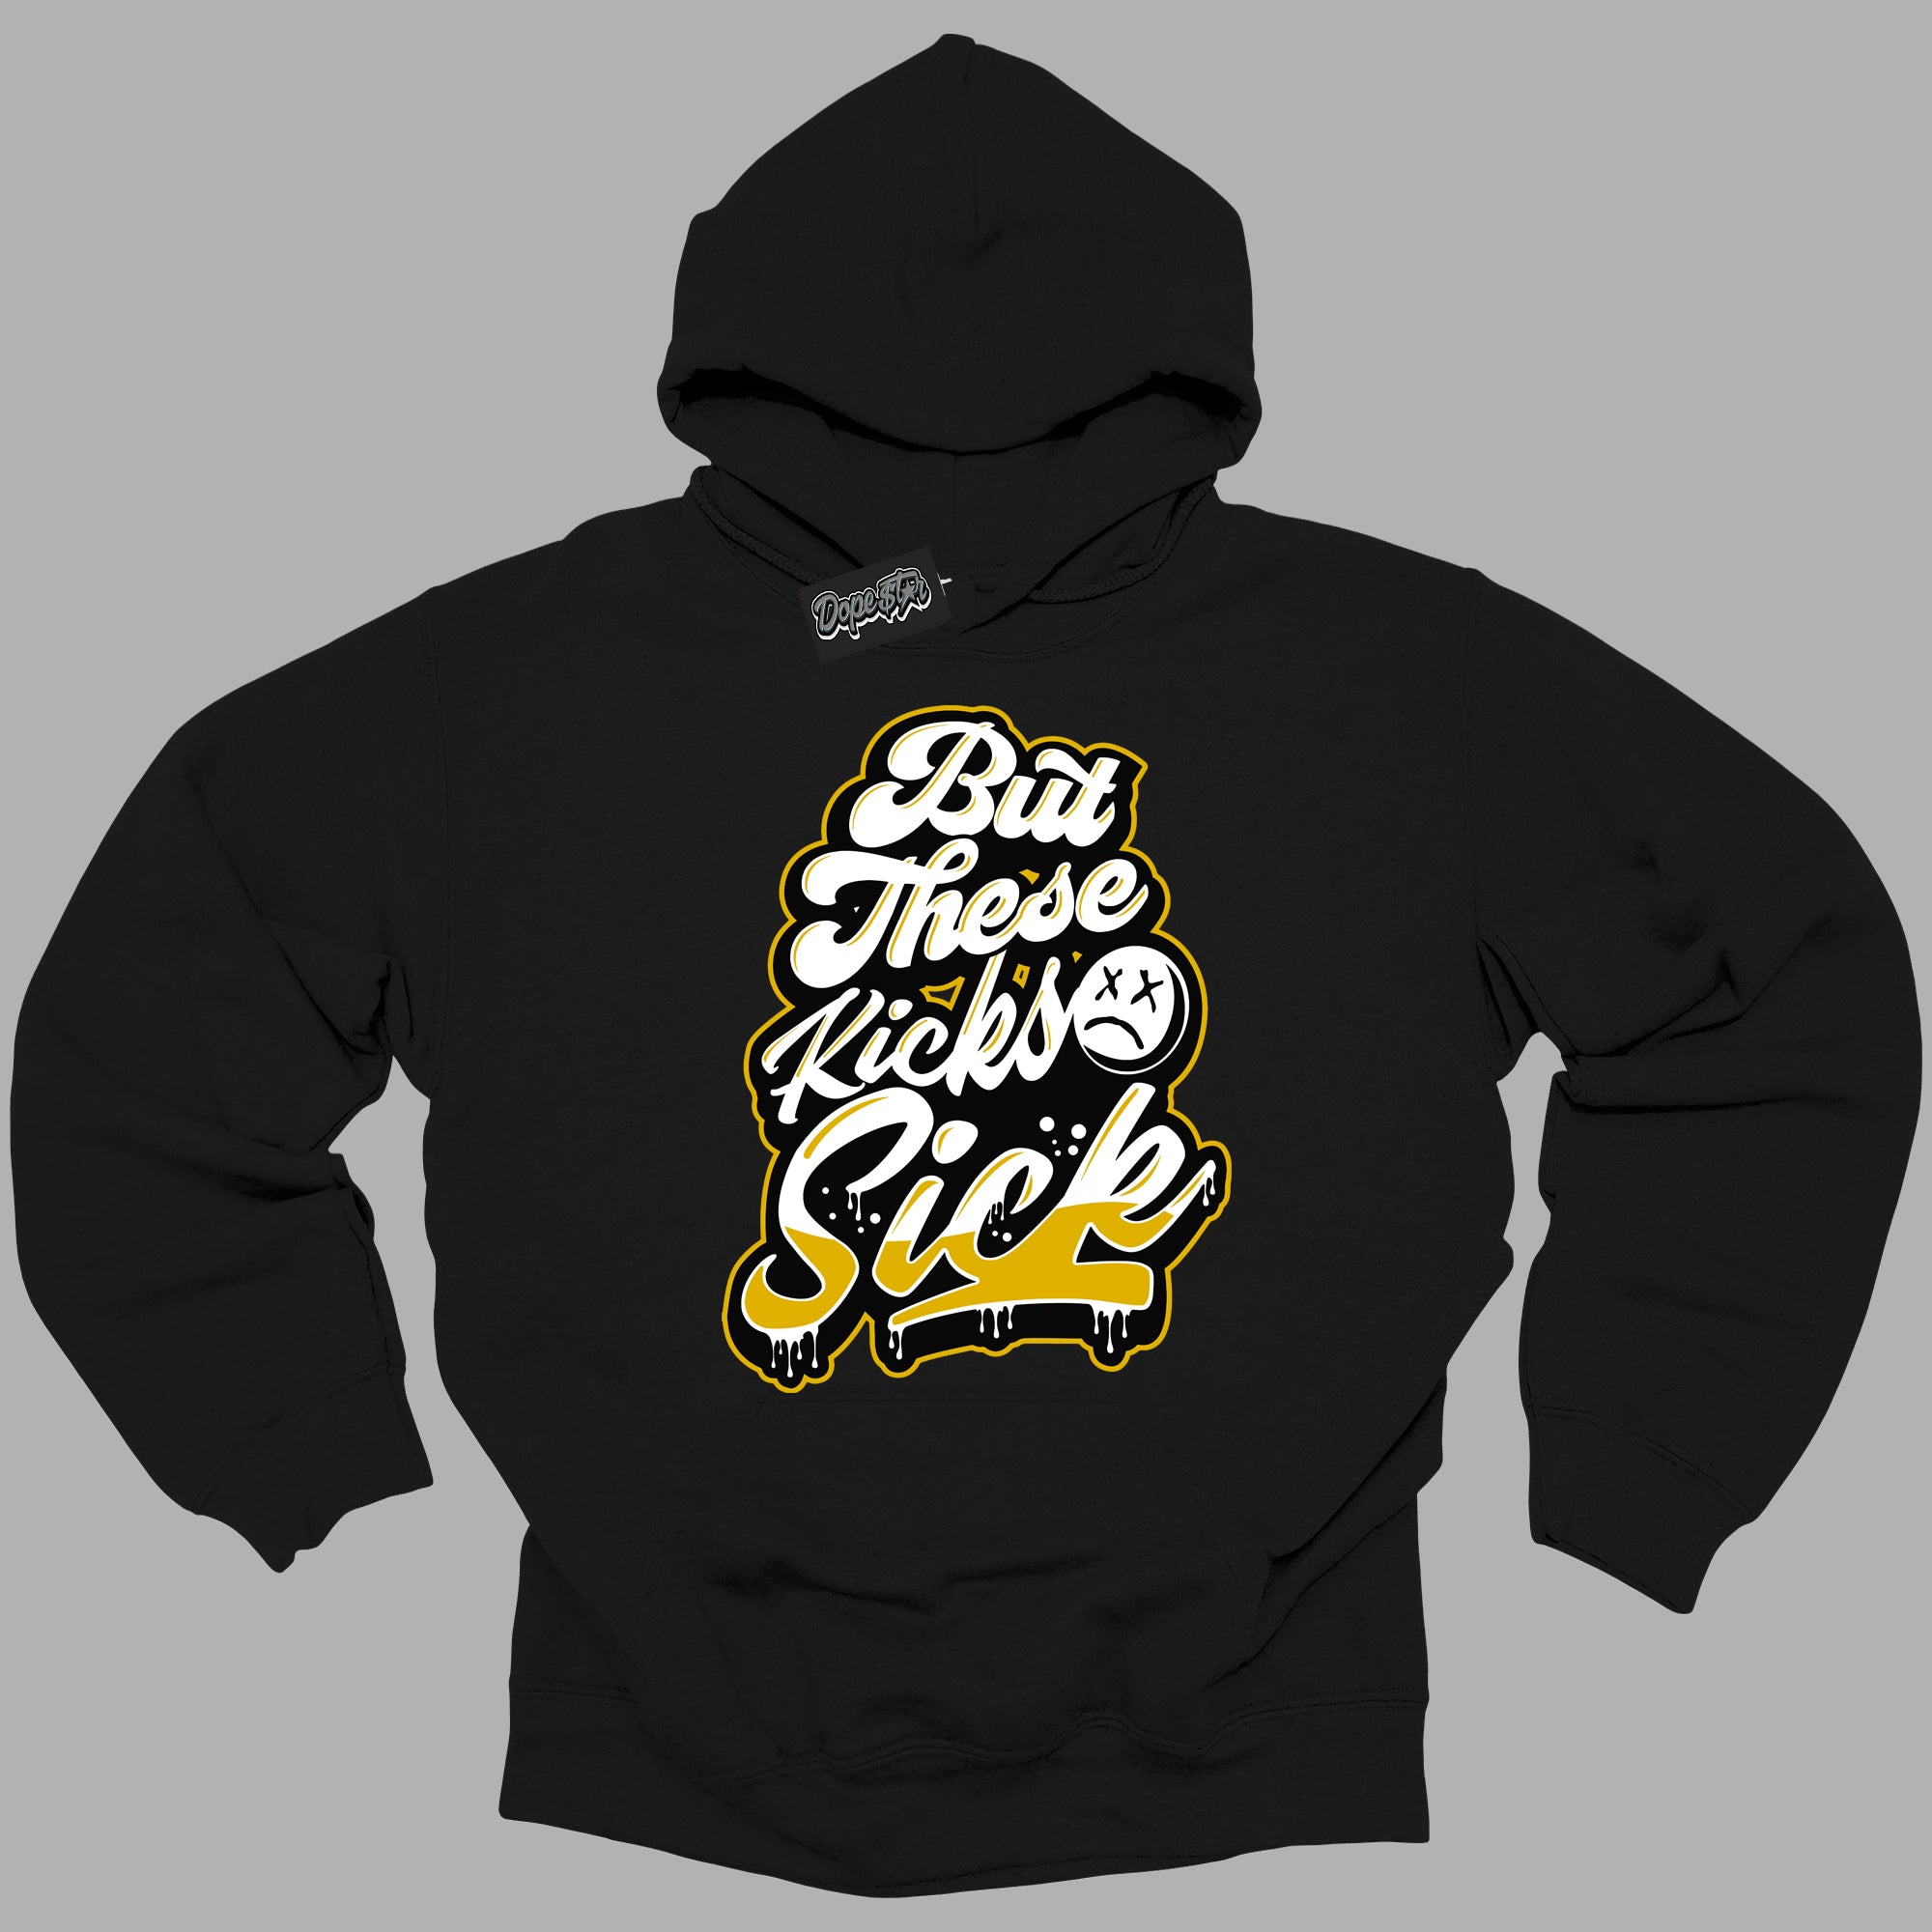 Cool Black Hoodie with “ Kick Sick ”  design that Perfectly Matches Yellow Ochre 6s Sneakers.